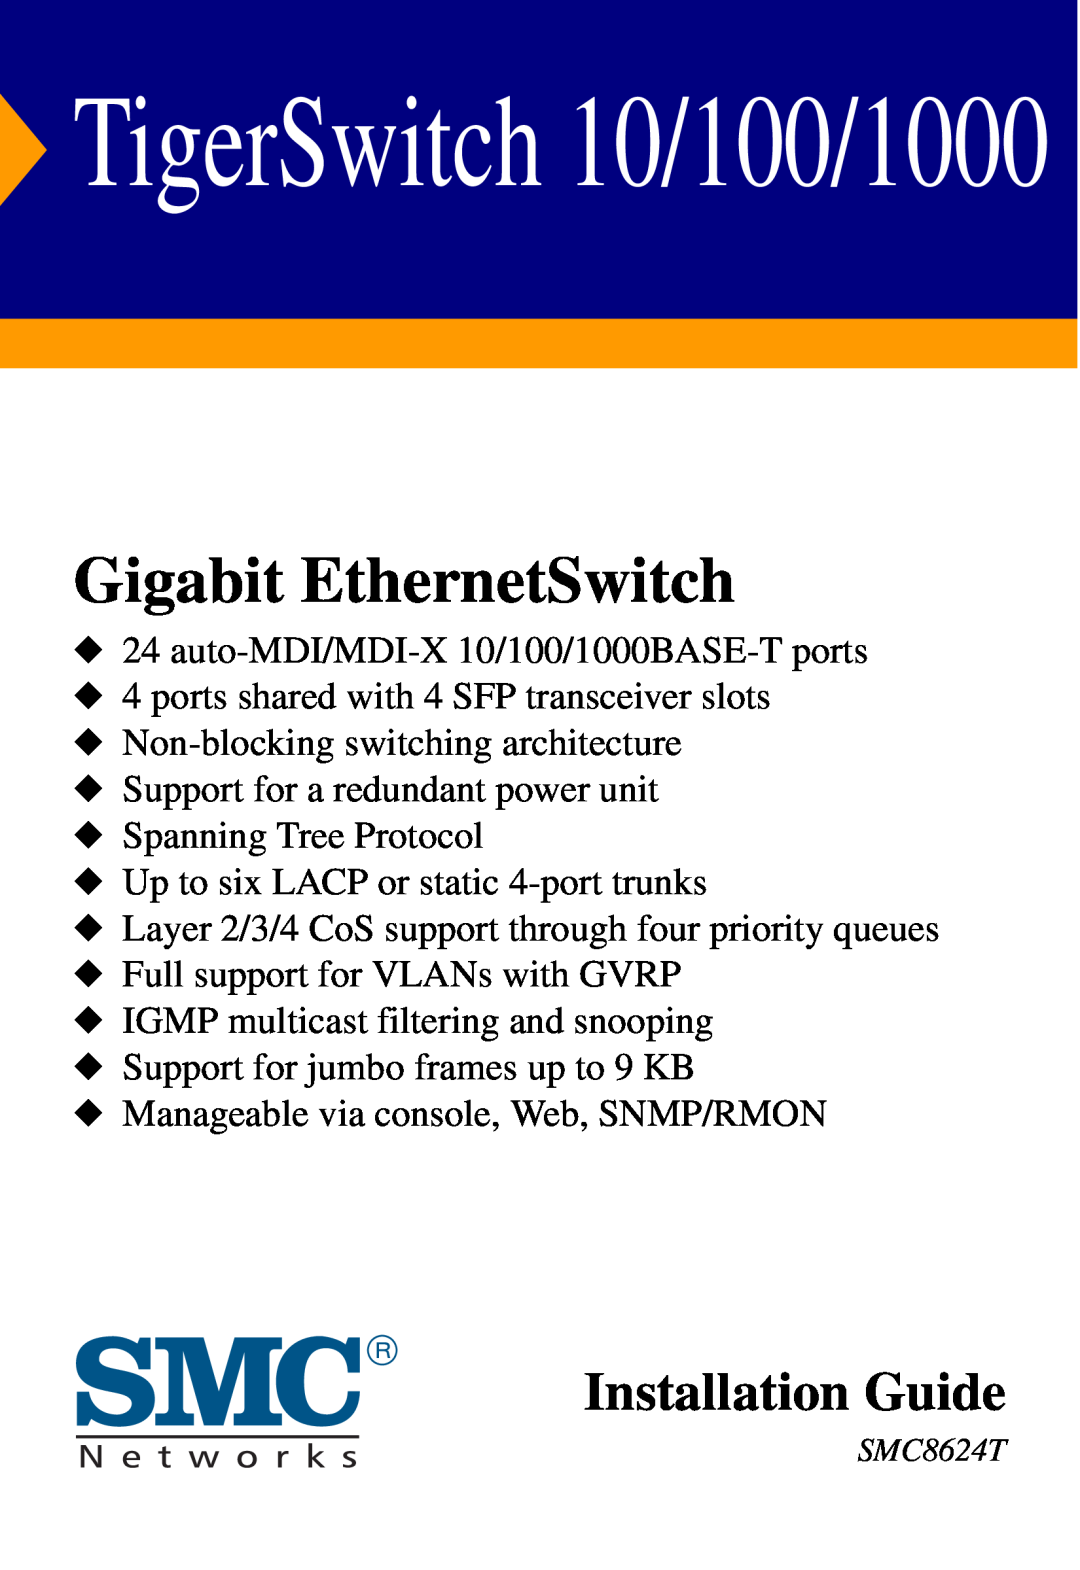 SMC Networks SMC8624T manual Gigabit EthernetSwitch, TigerSwitch 10/100/1000, Installation Guide 